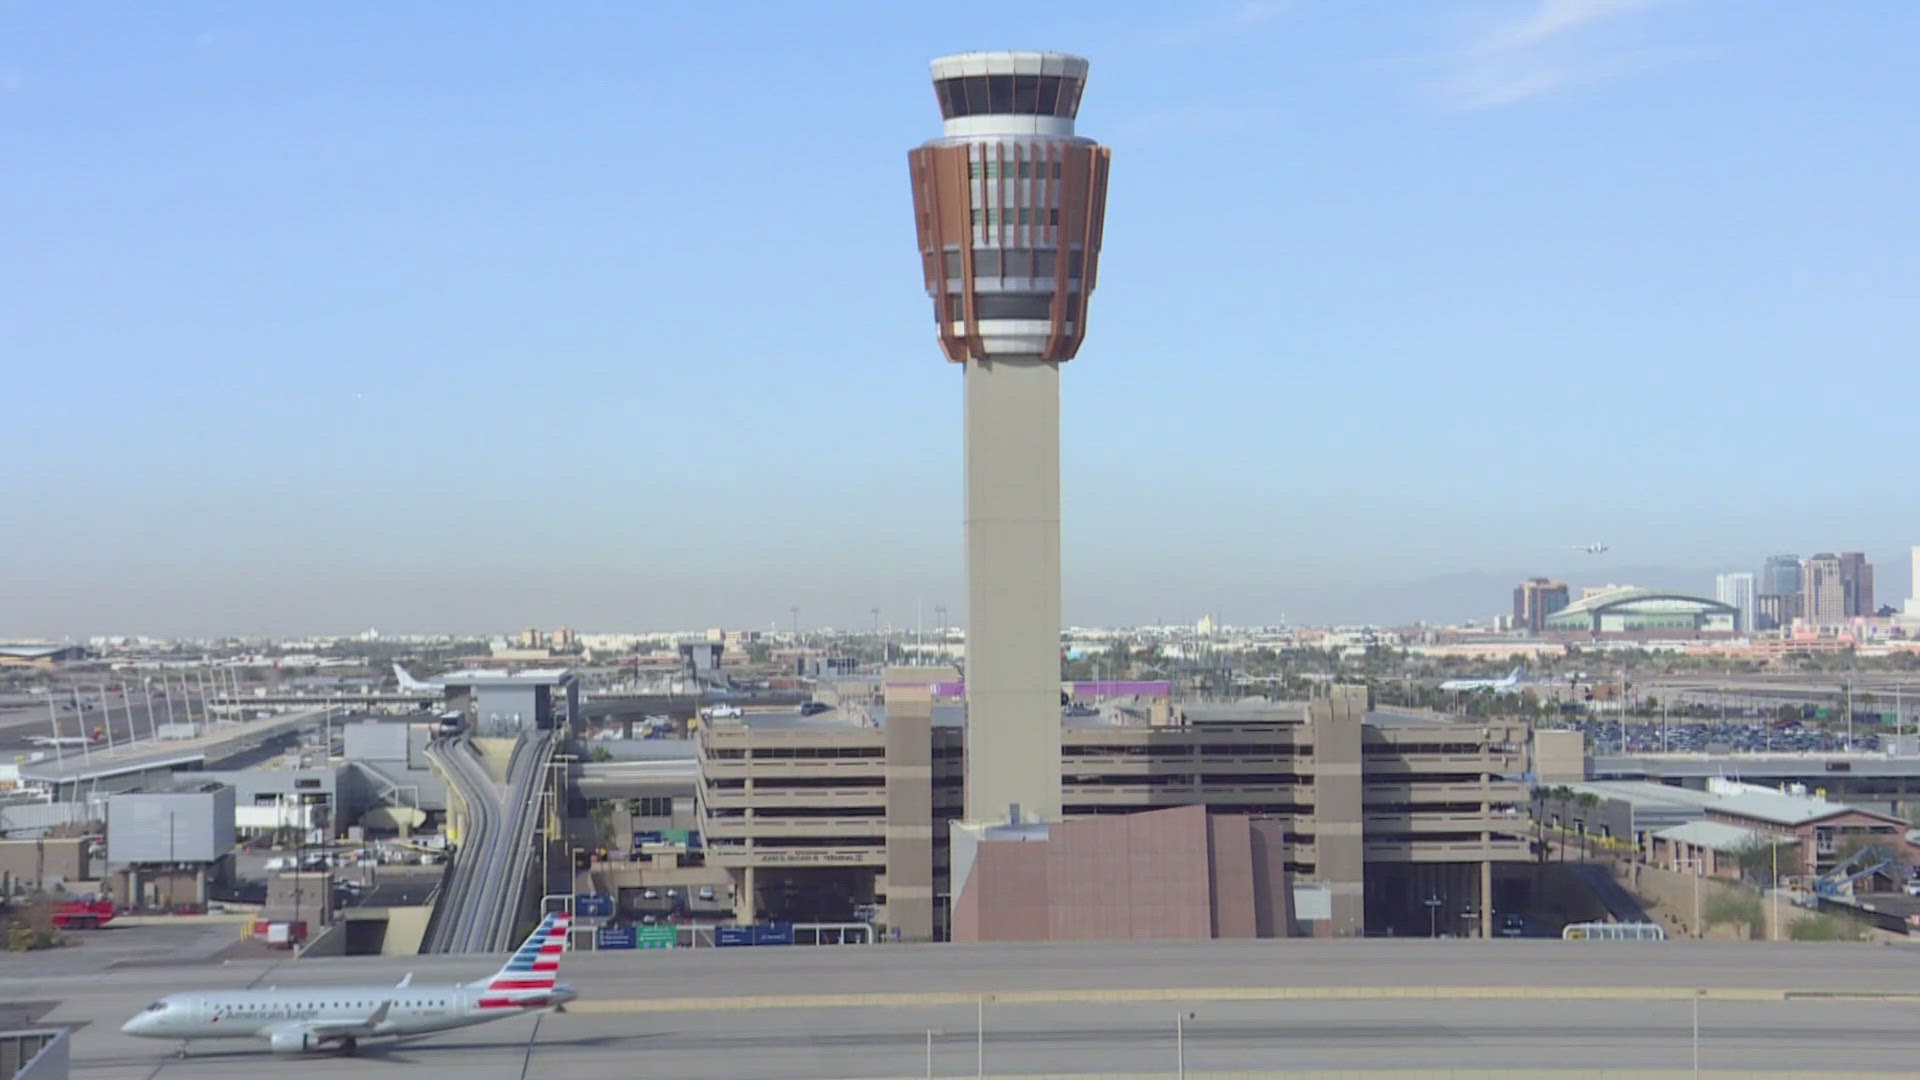 Mayor Gallego just announced new funding a new terminal at Phoenix Sky Harbor airport.